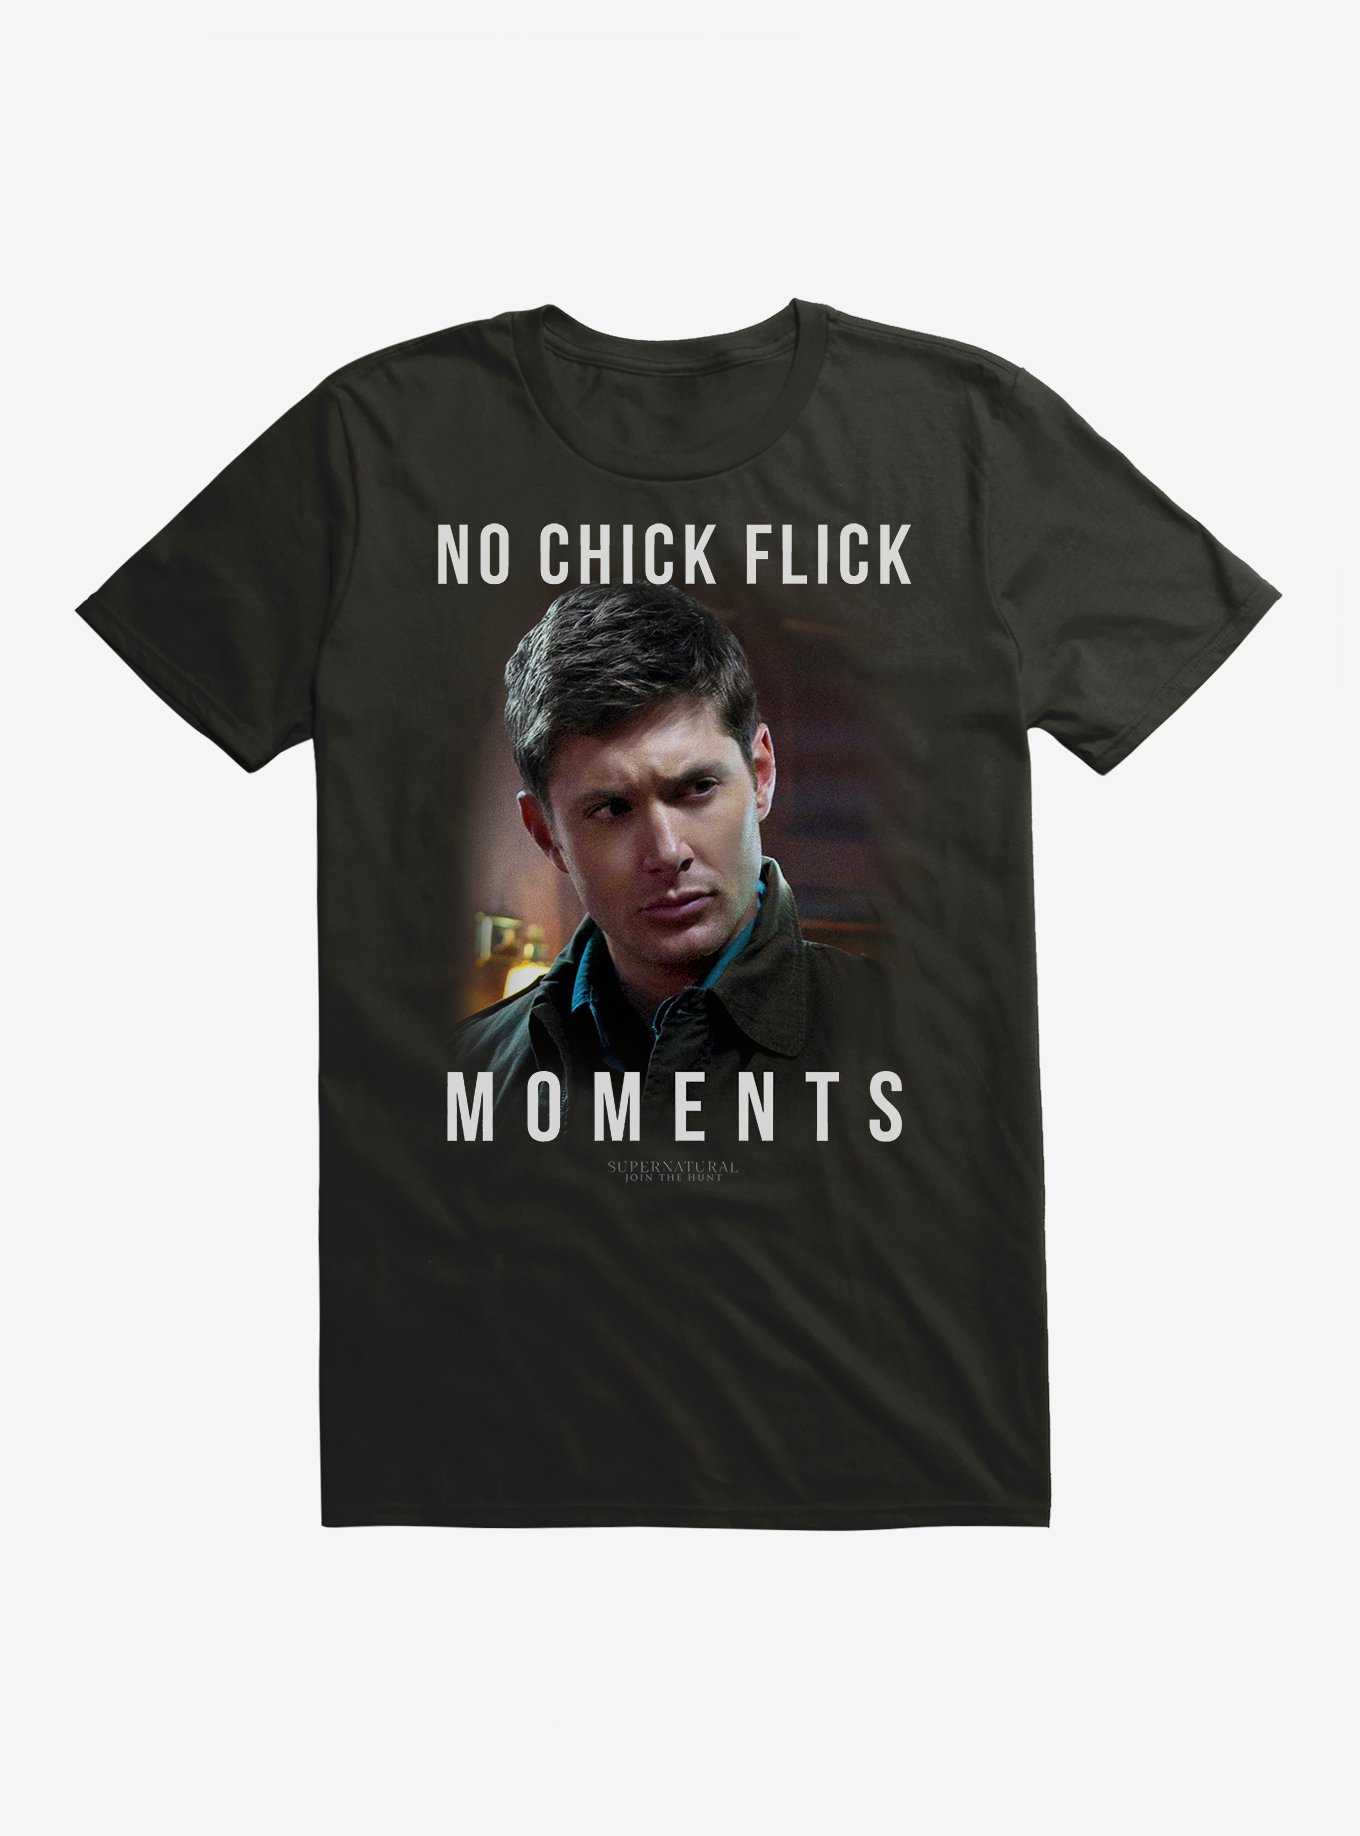 Hot Topic - No need to hunt for Supernatural merch! Just click